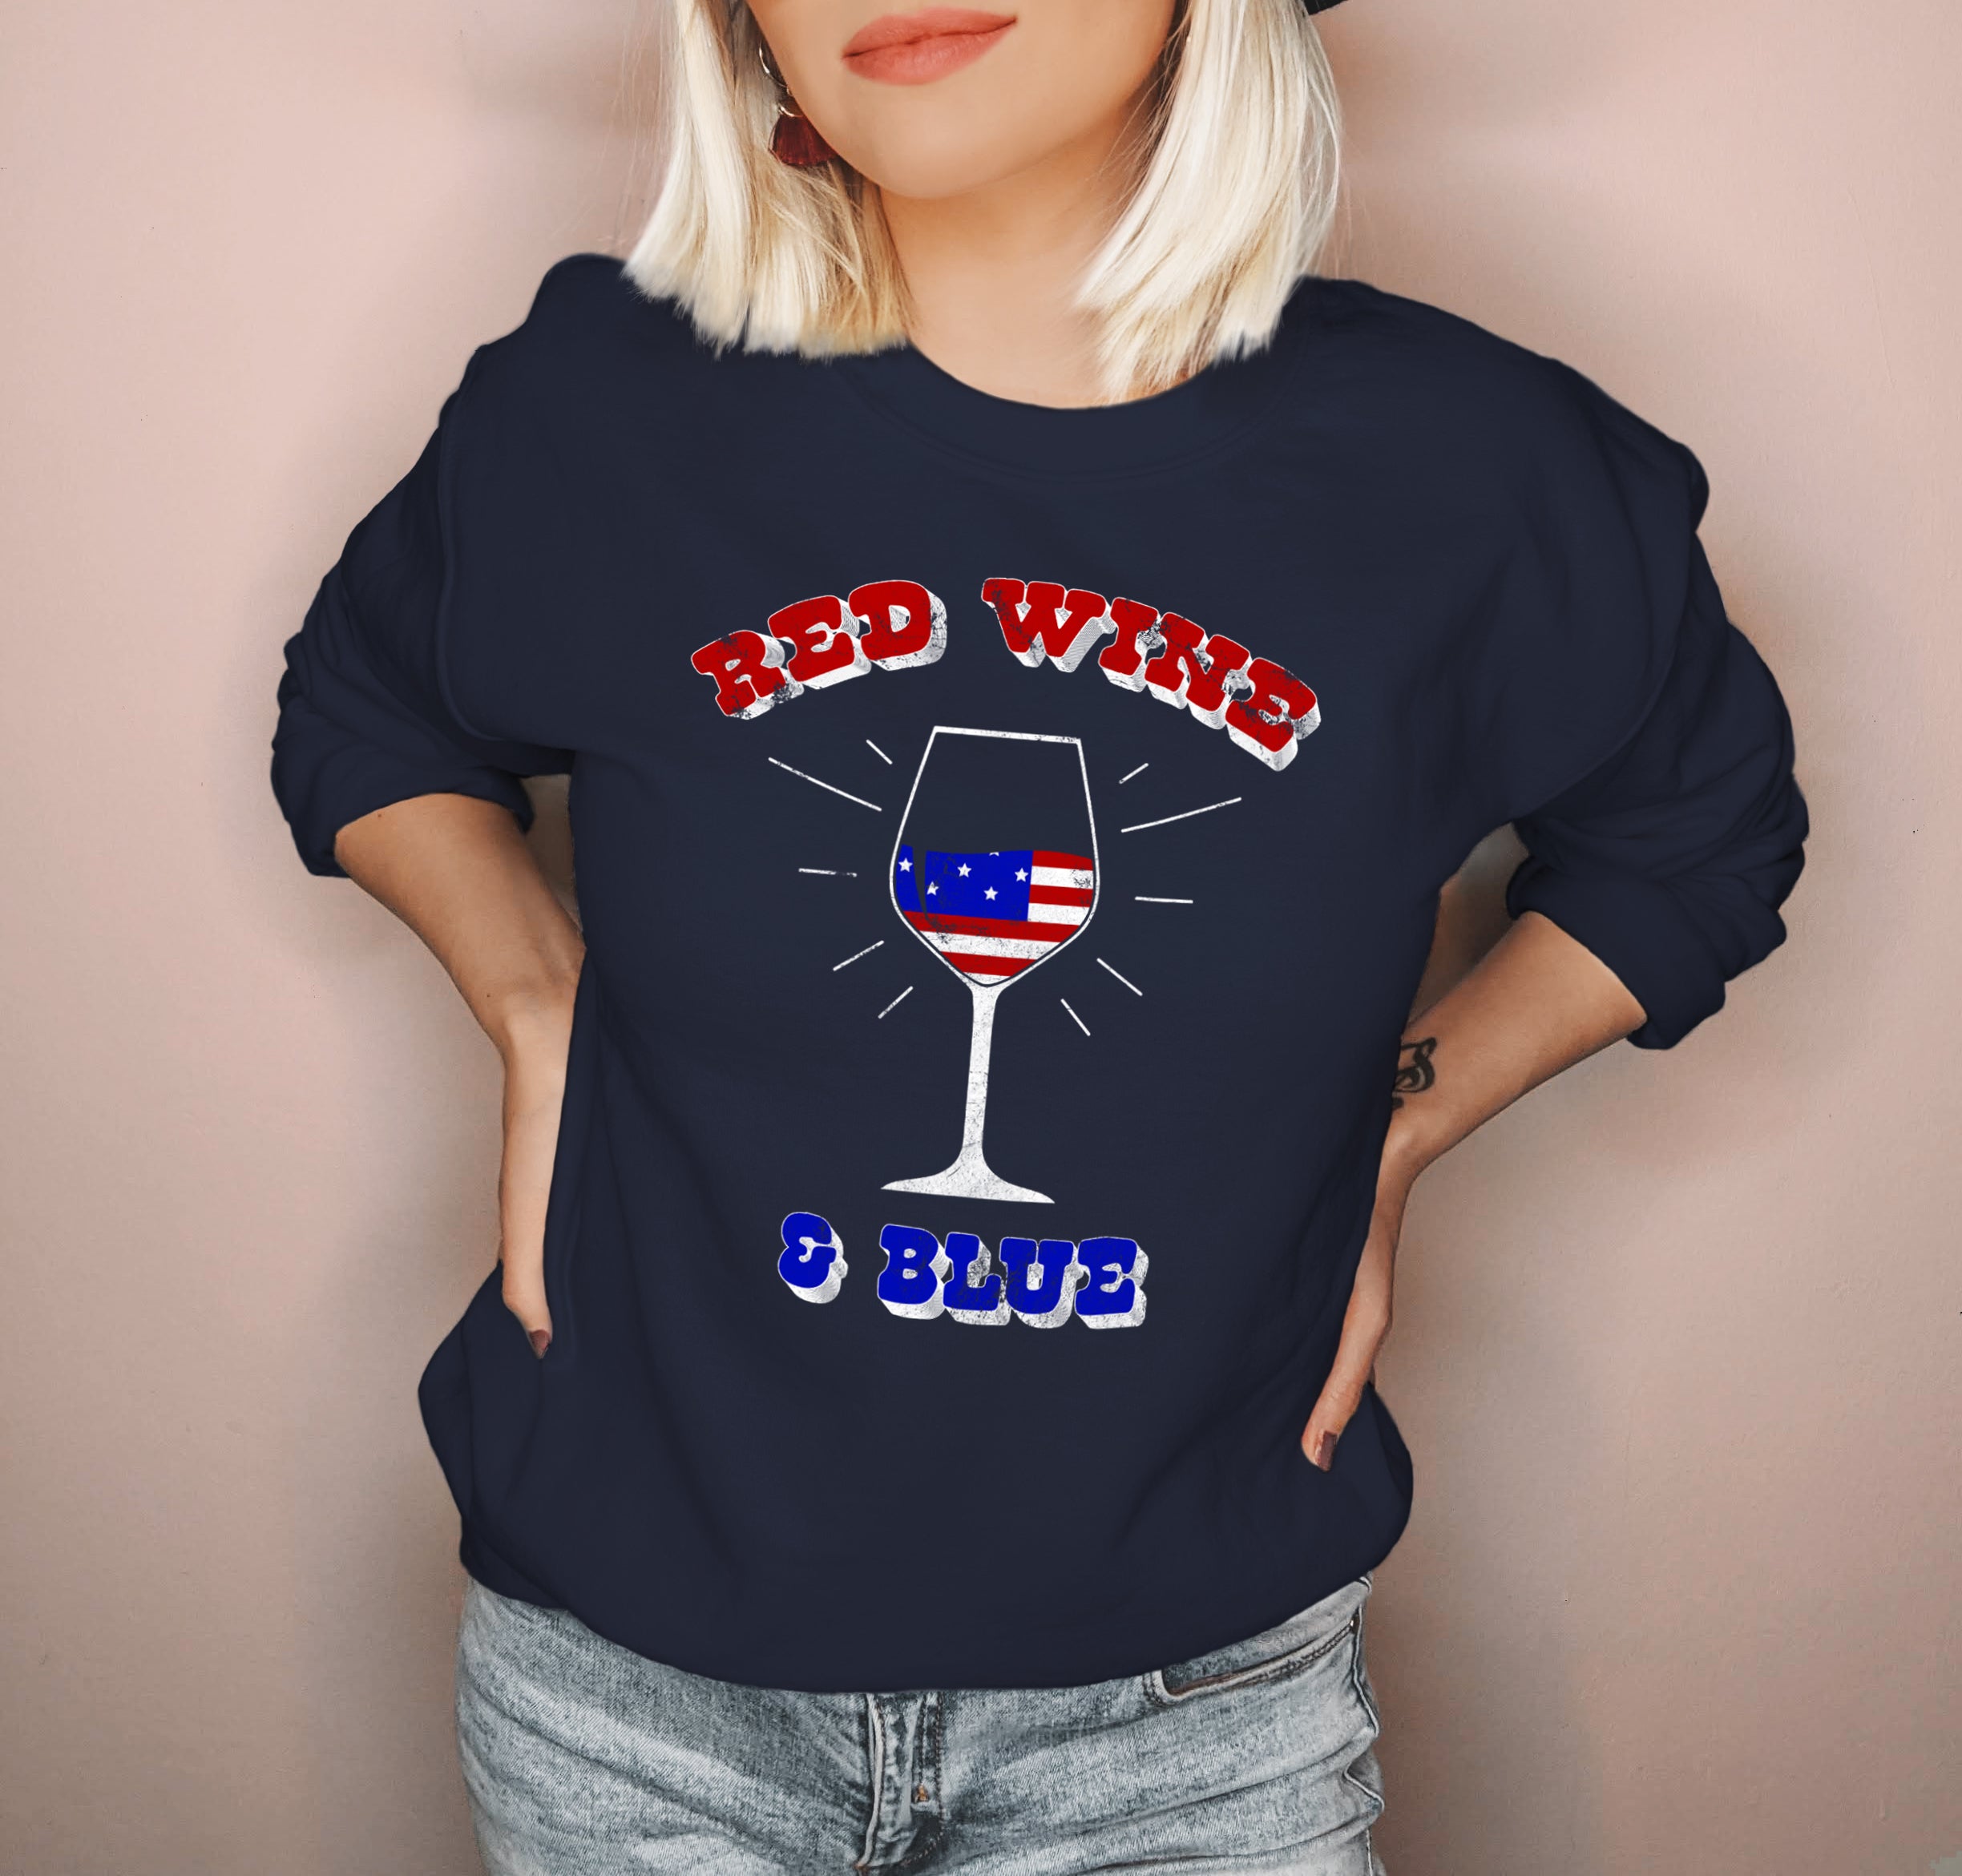 Navy sweatshirt with a wine glass that says red wine and blue - HighCiti